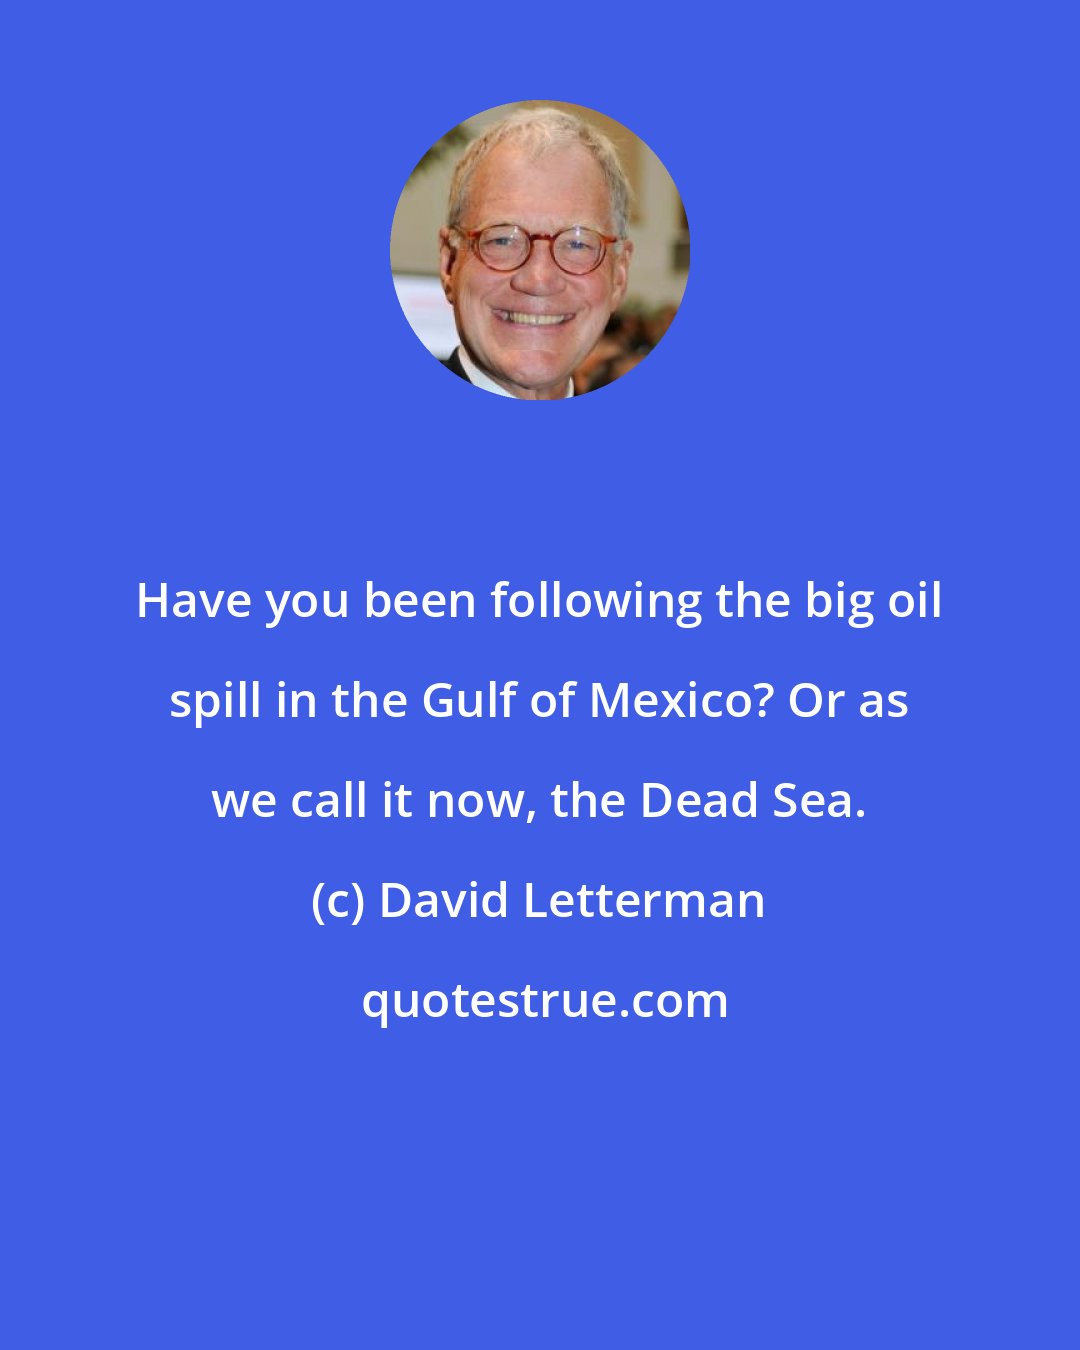 David Letterman: Have you been following the big oil spill in the Gulf of Mexico? Or as we call it now, the Dead Sea.